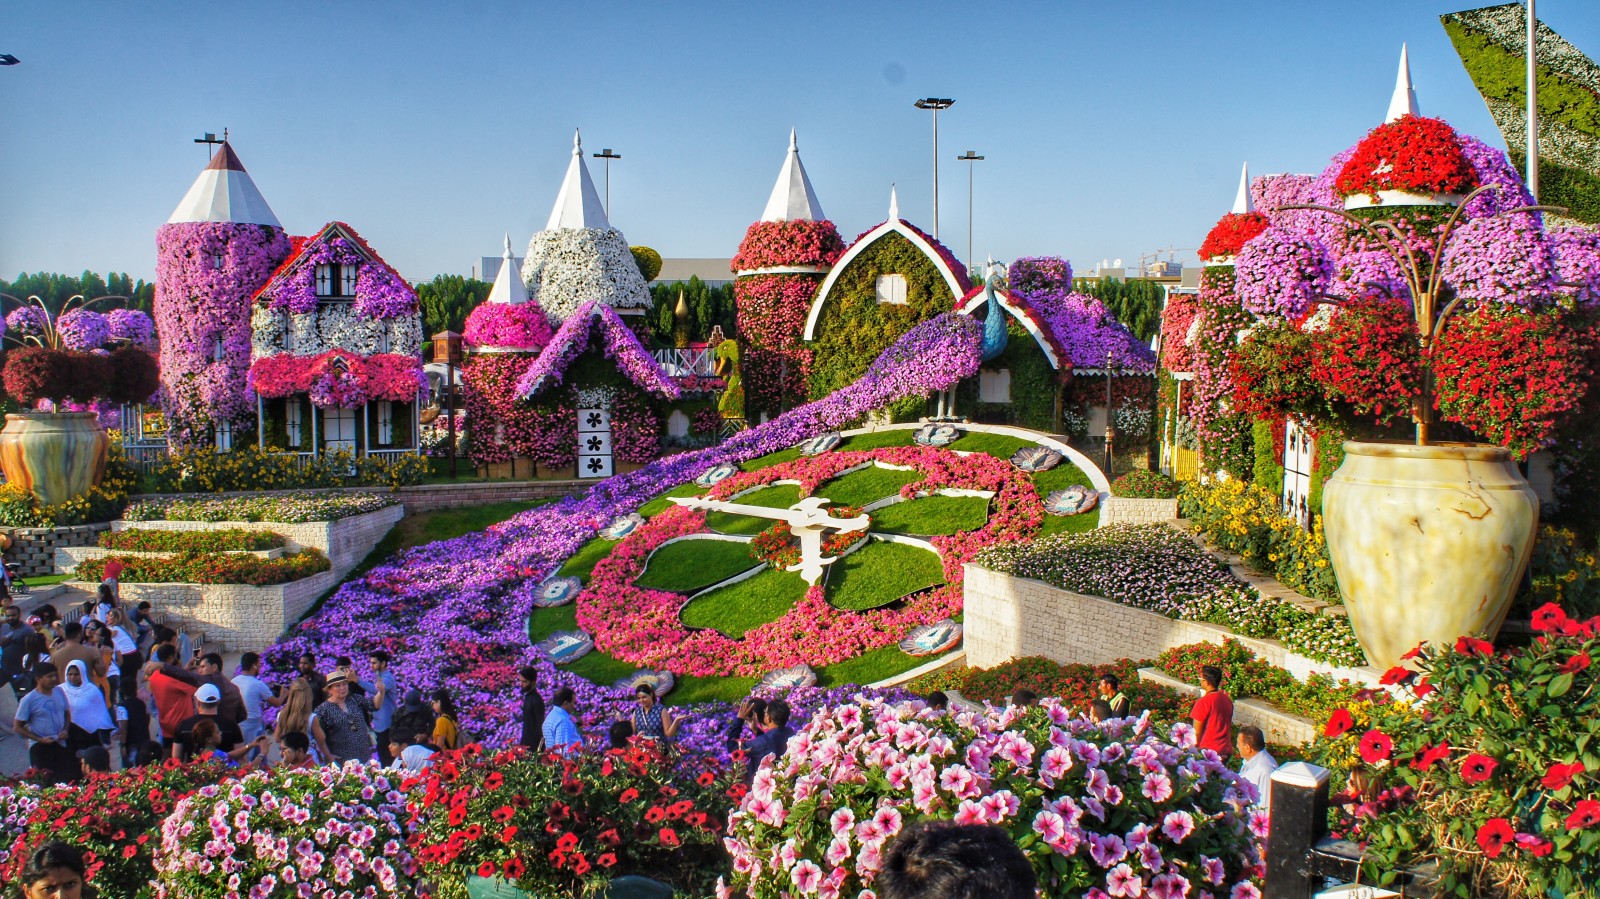 Miracle garden with purple and pink flowers and sculptures in Dubai